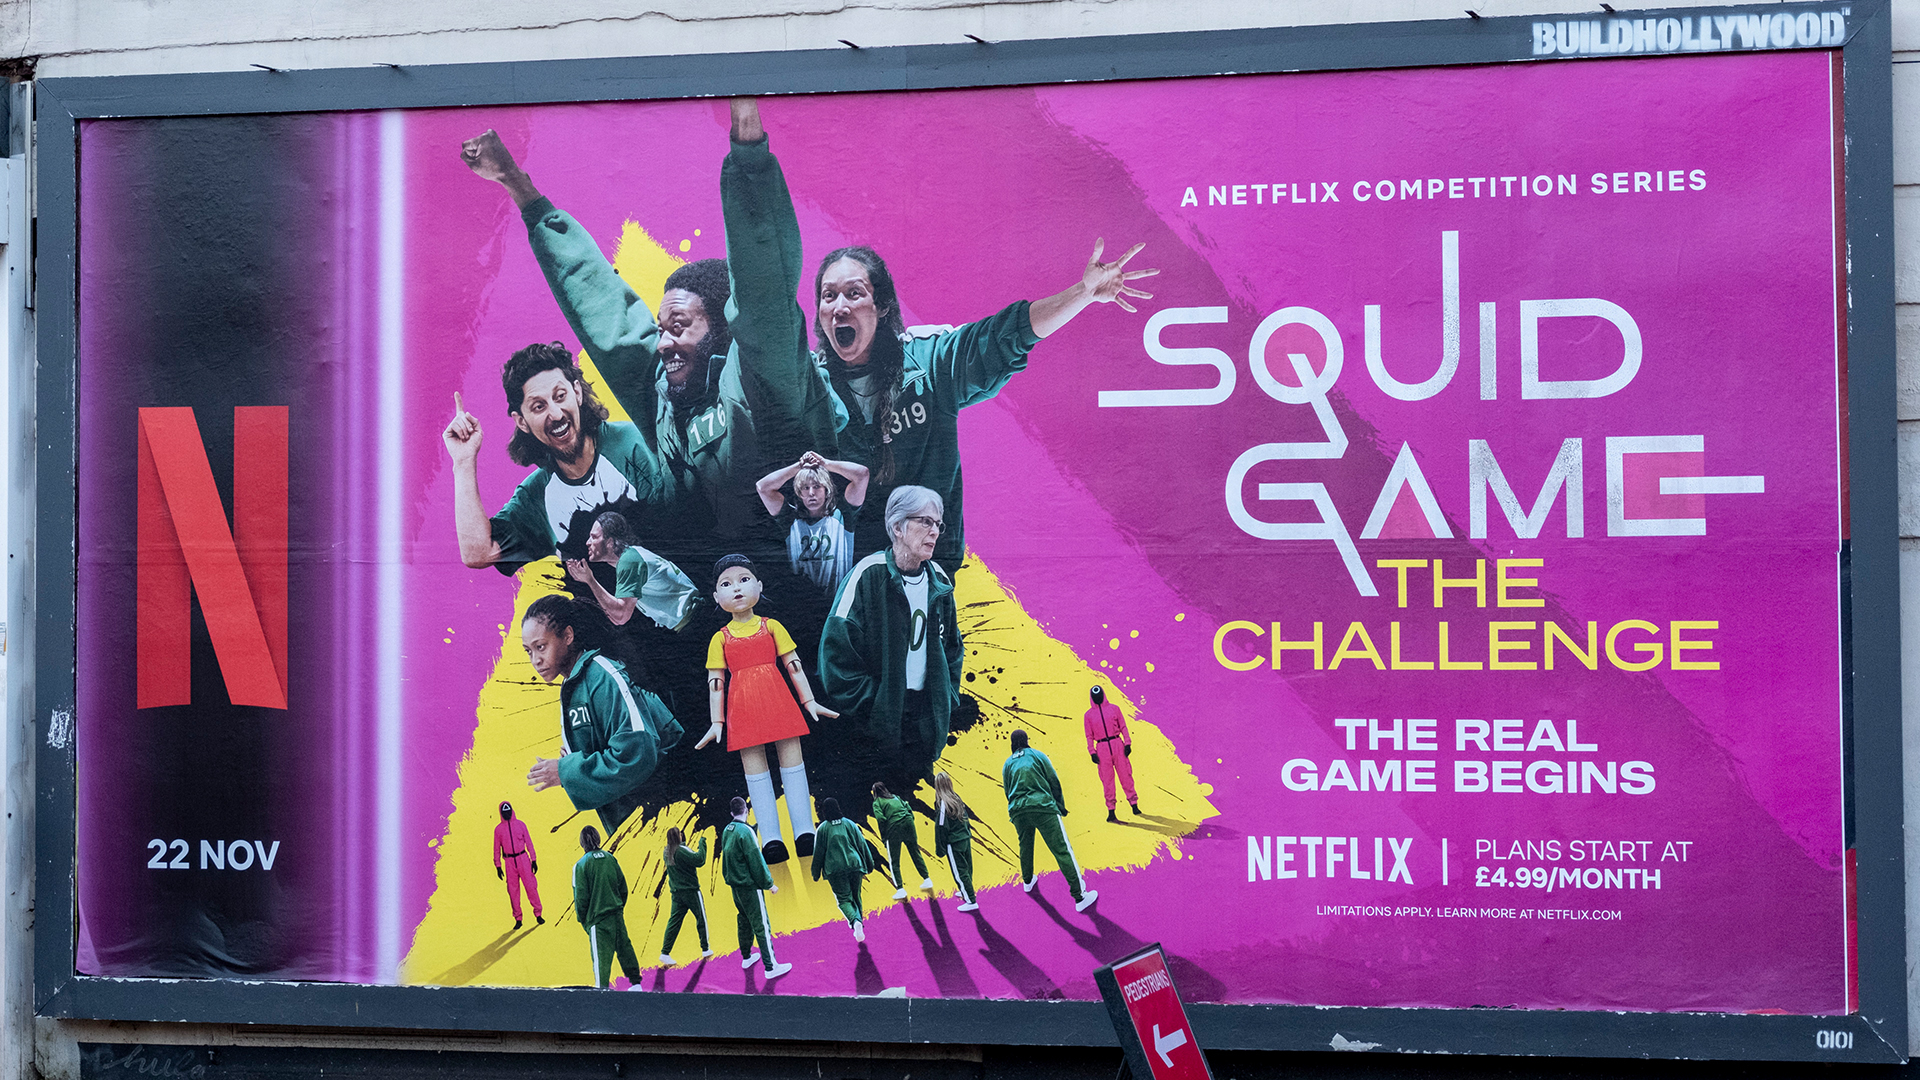 What The Hell Is Squid Game On Netflix All About?